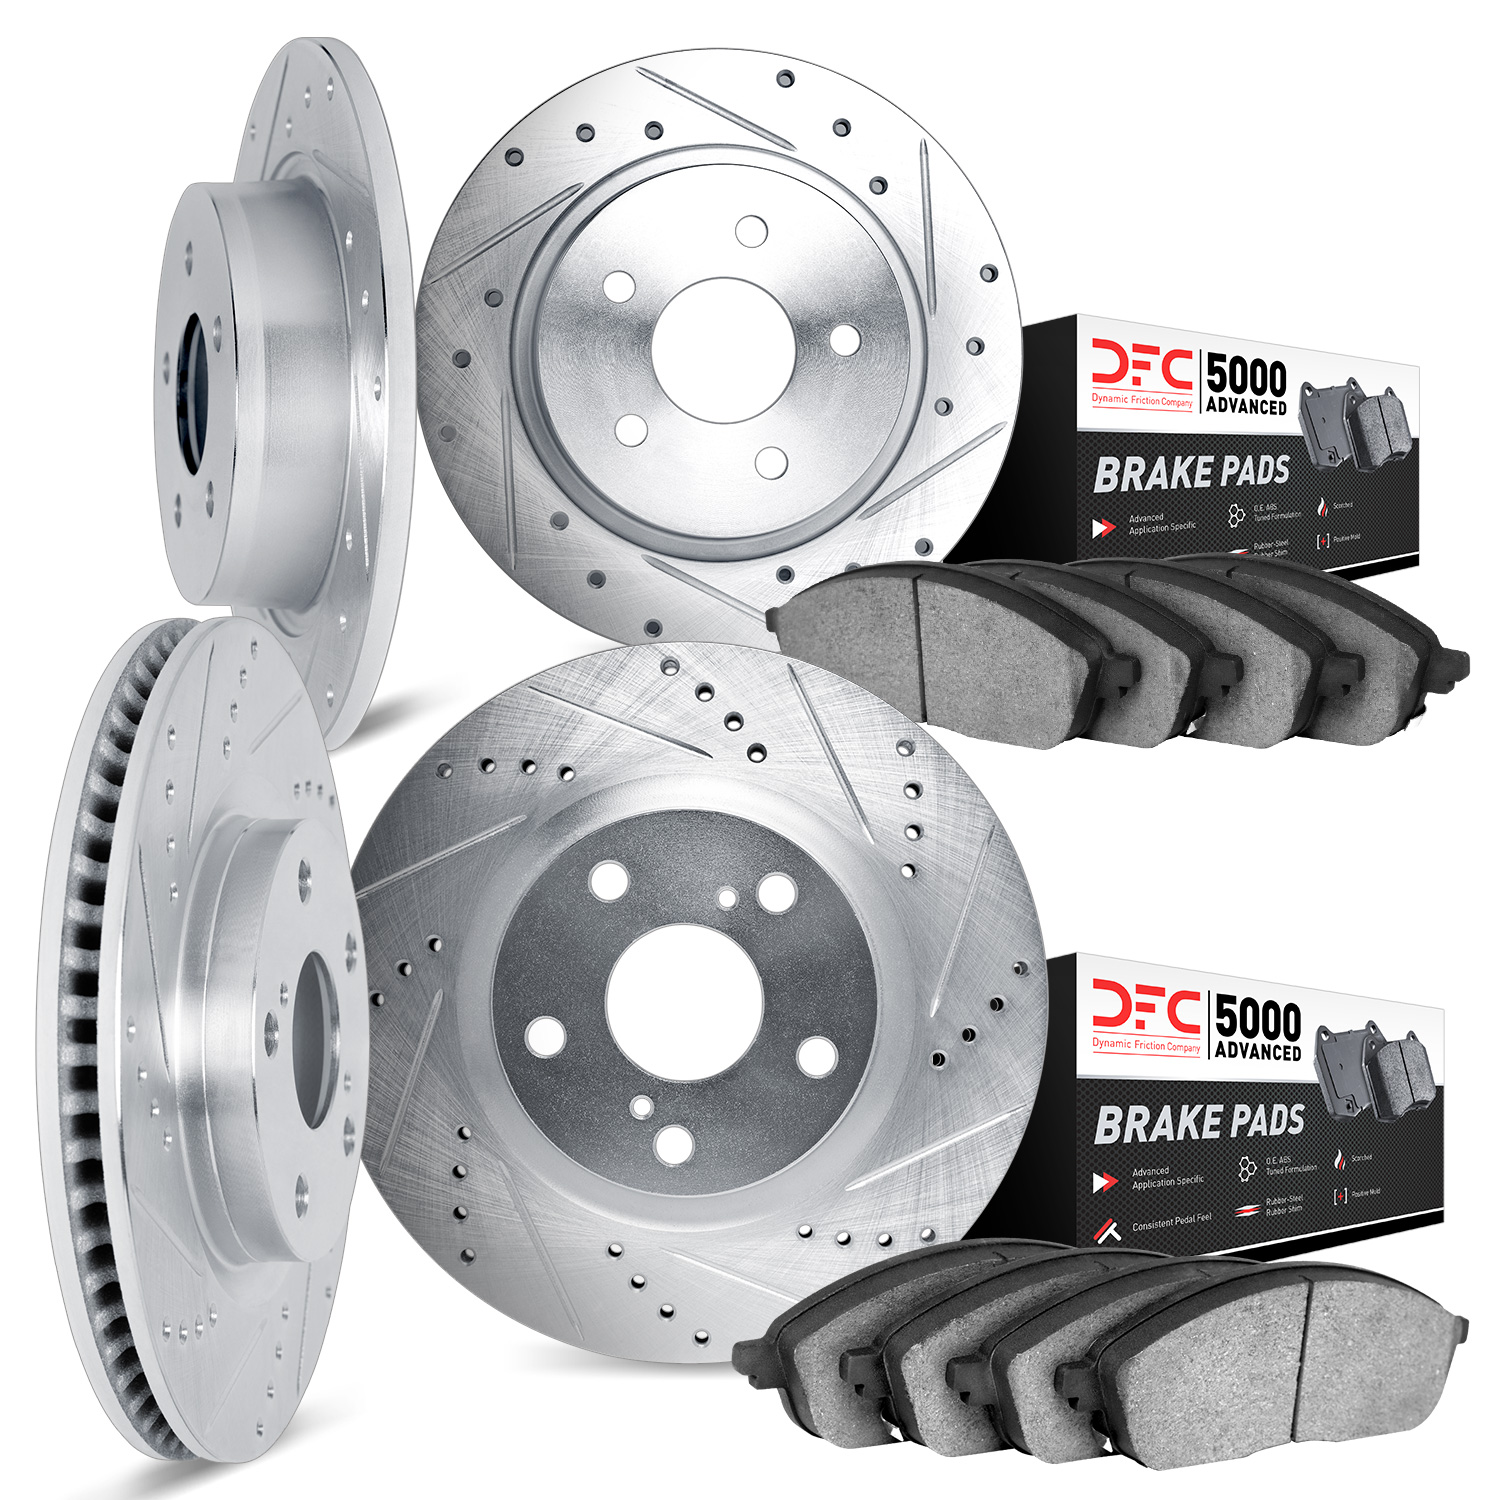 7504-76142 Drilled/Slotted Brake Rotors w/5000 Advanced Brake Pads Kit [Silver], 2001-2003 Lexus/Toyota/Scion, Position: Front a